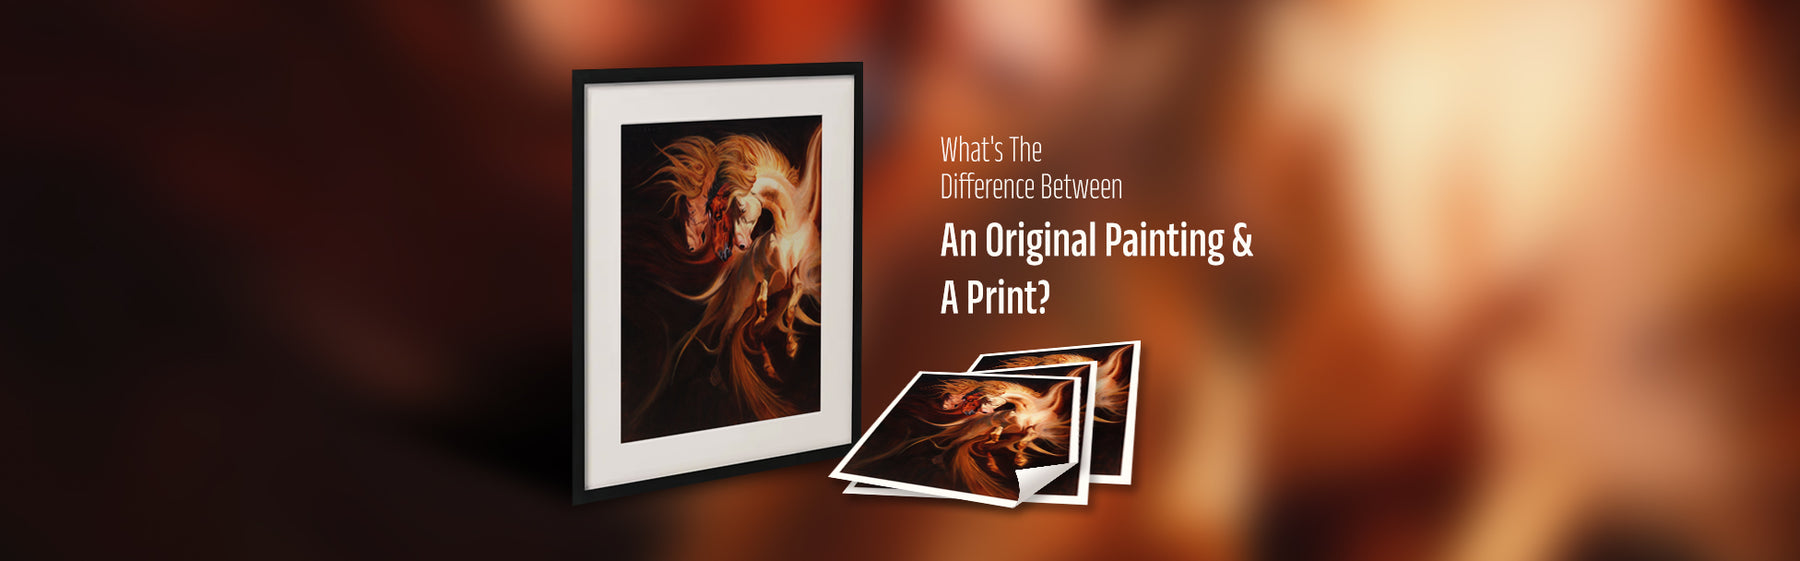 What's The Difference Between An Original Painting And A Print?